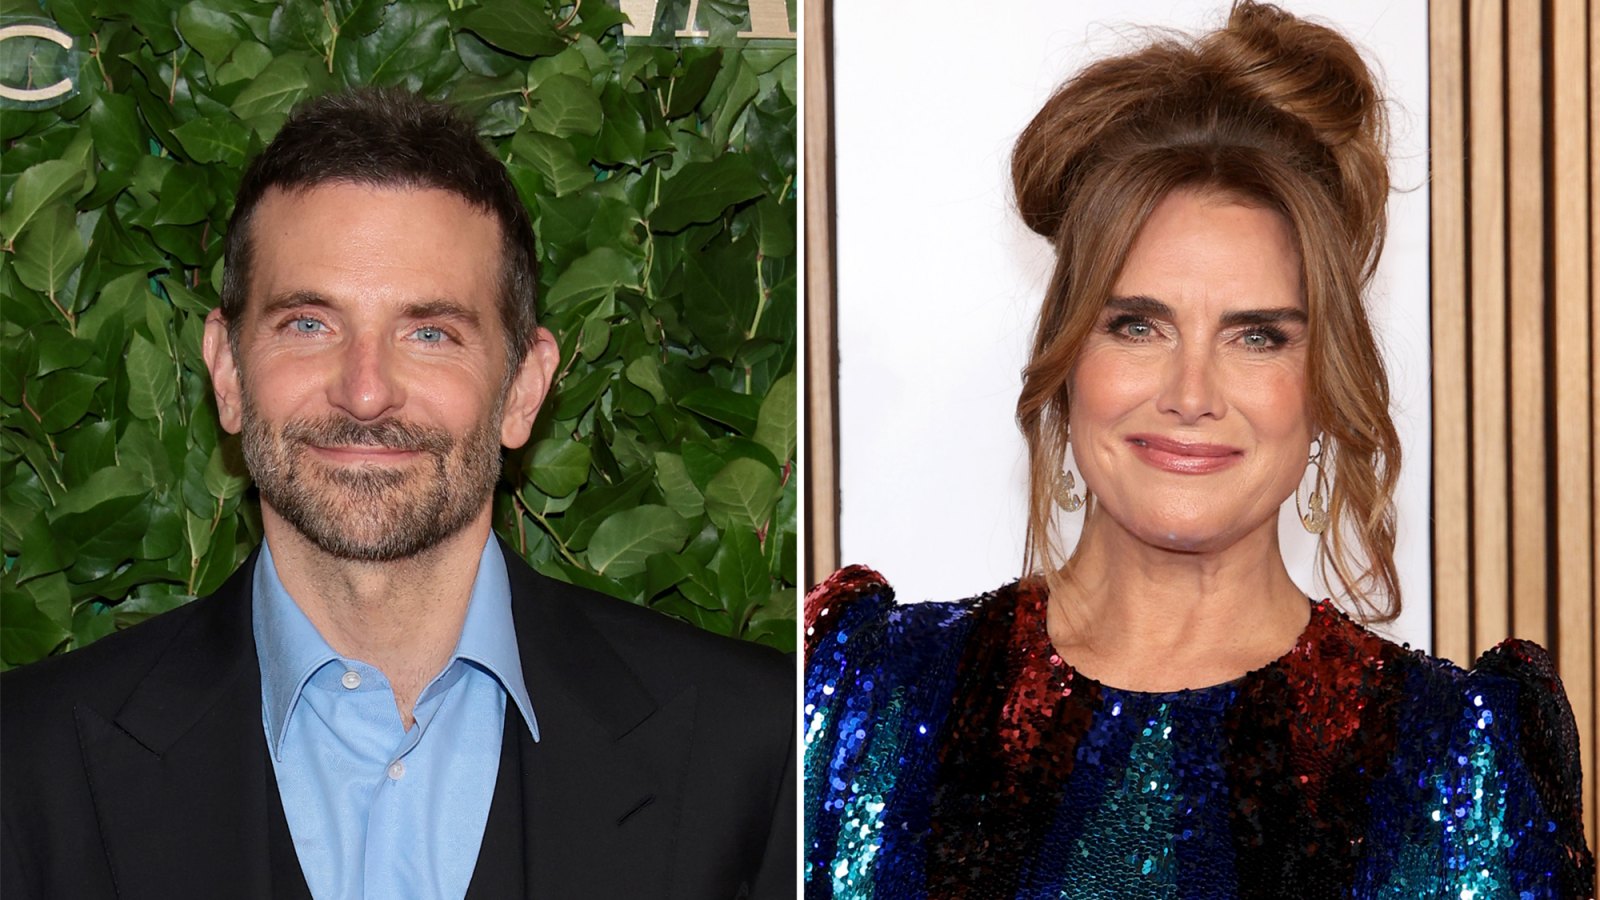 Bradley Cooper Stays Humble When Asked About Helping Brooke Shields After Seizure